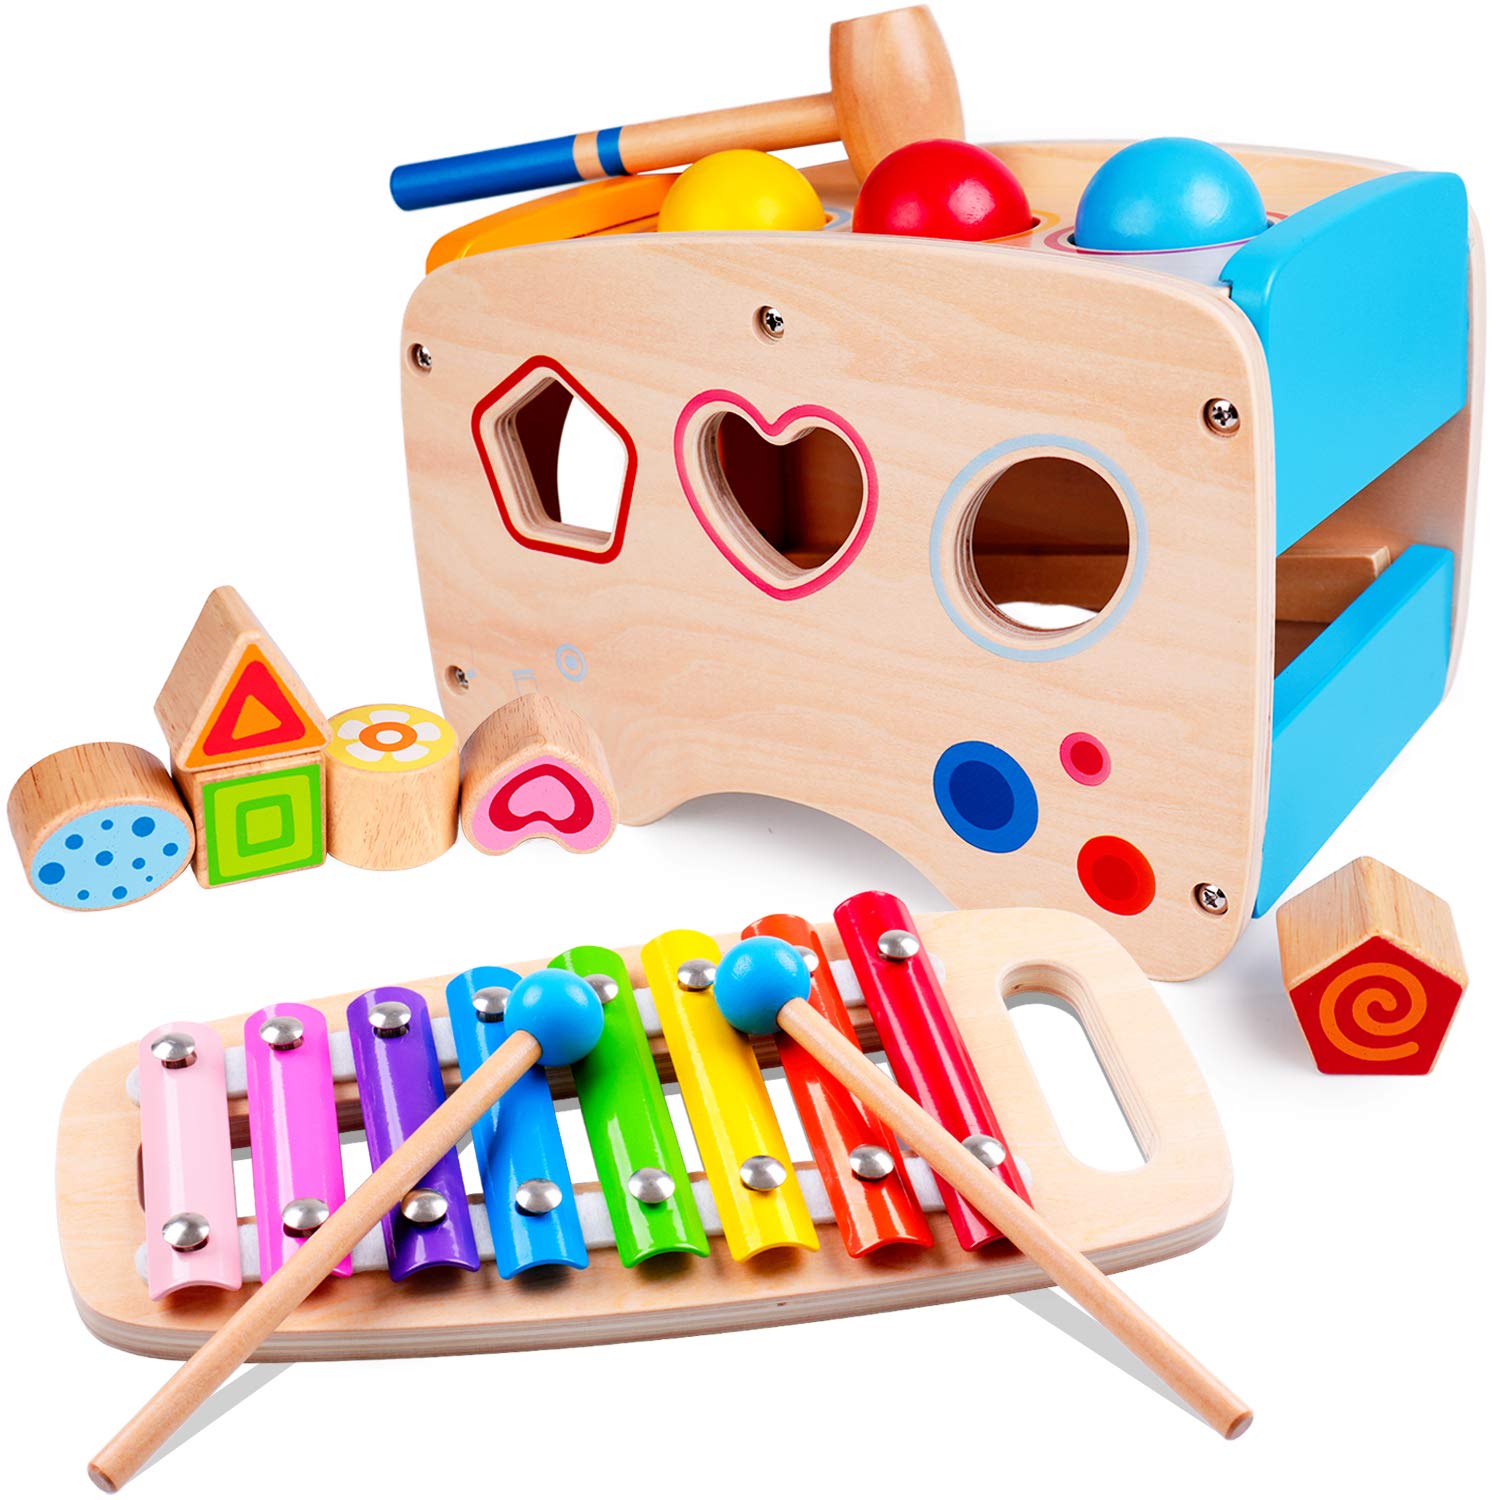 Clock 5-in-1 Kids Educational Wooden Toys with Pounding Bench Mirror and Sliding Montessori Early Development Toy Gift for Toddler Boys Girls Gear Nukied Wooden Hammering Pounding Toy 